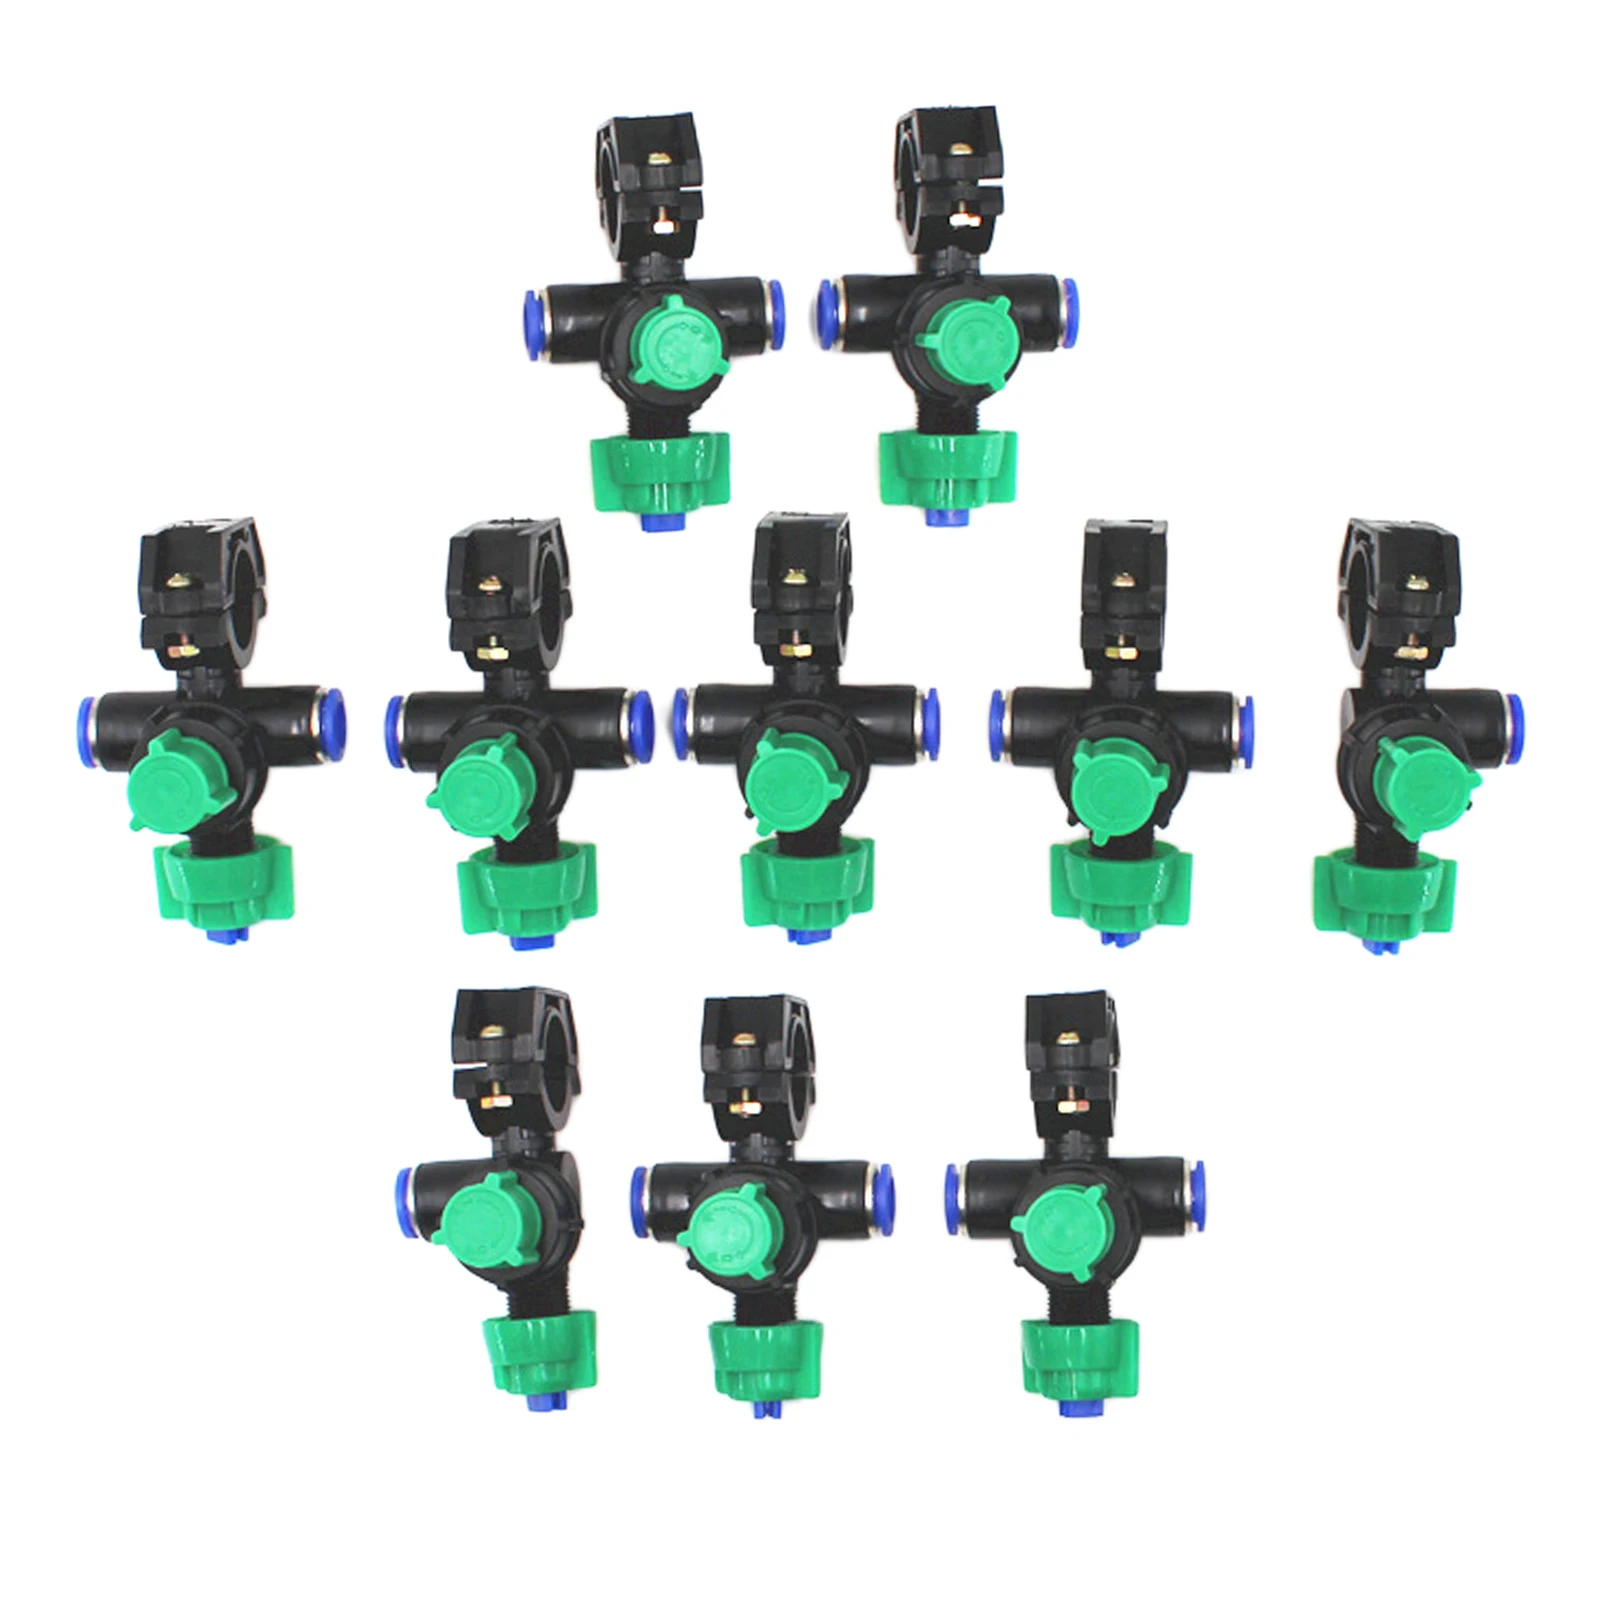 10x Agricultural Spray Nozzles Atomizing Sprayer Nozzle Head Garden Lawn Irrigation  Spraying Sprinkler Watering Tool